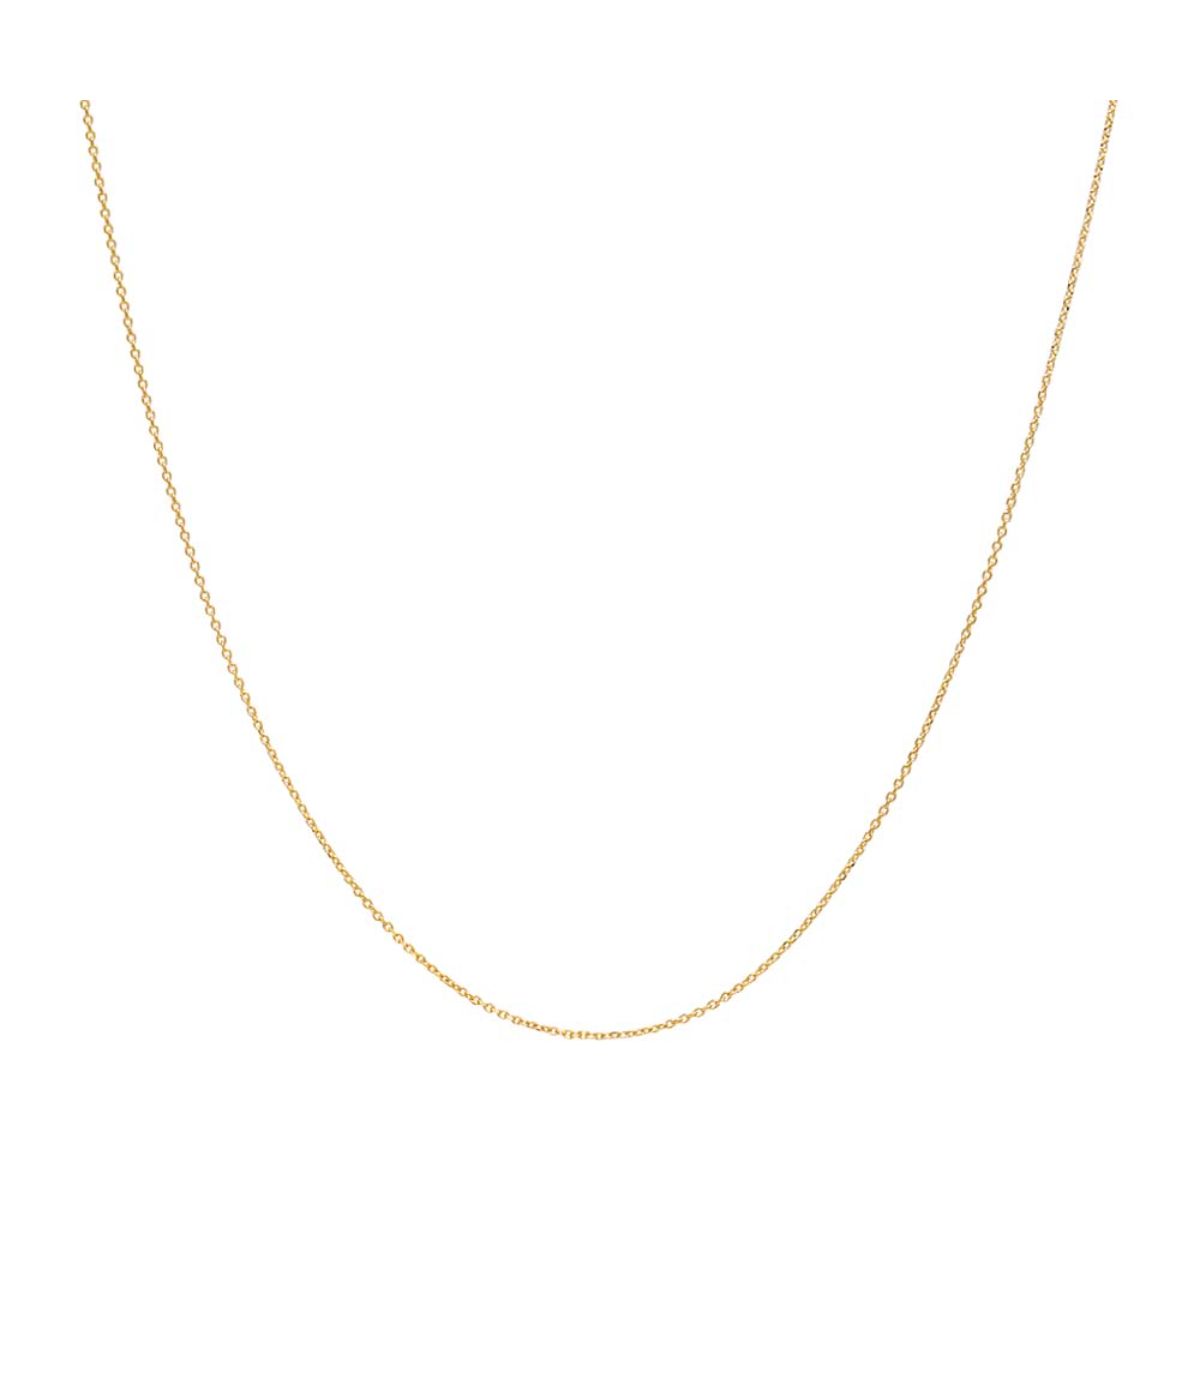 Chain Necklace 14K Gold